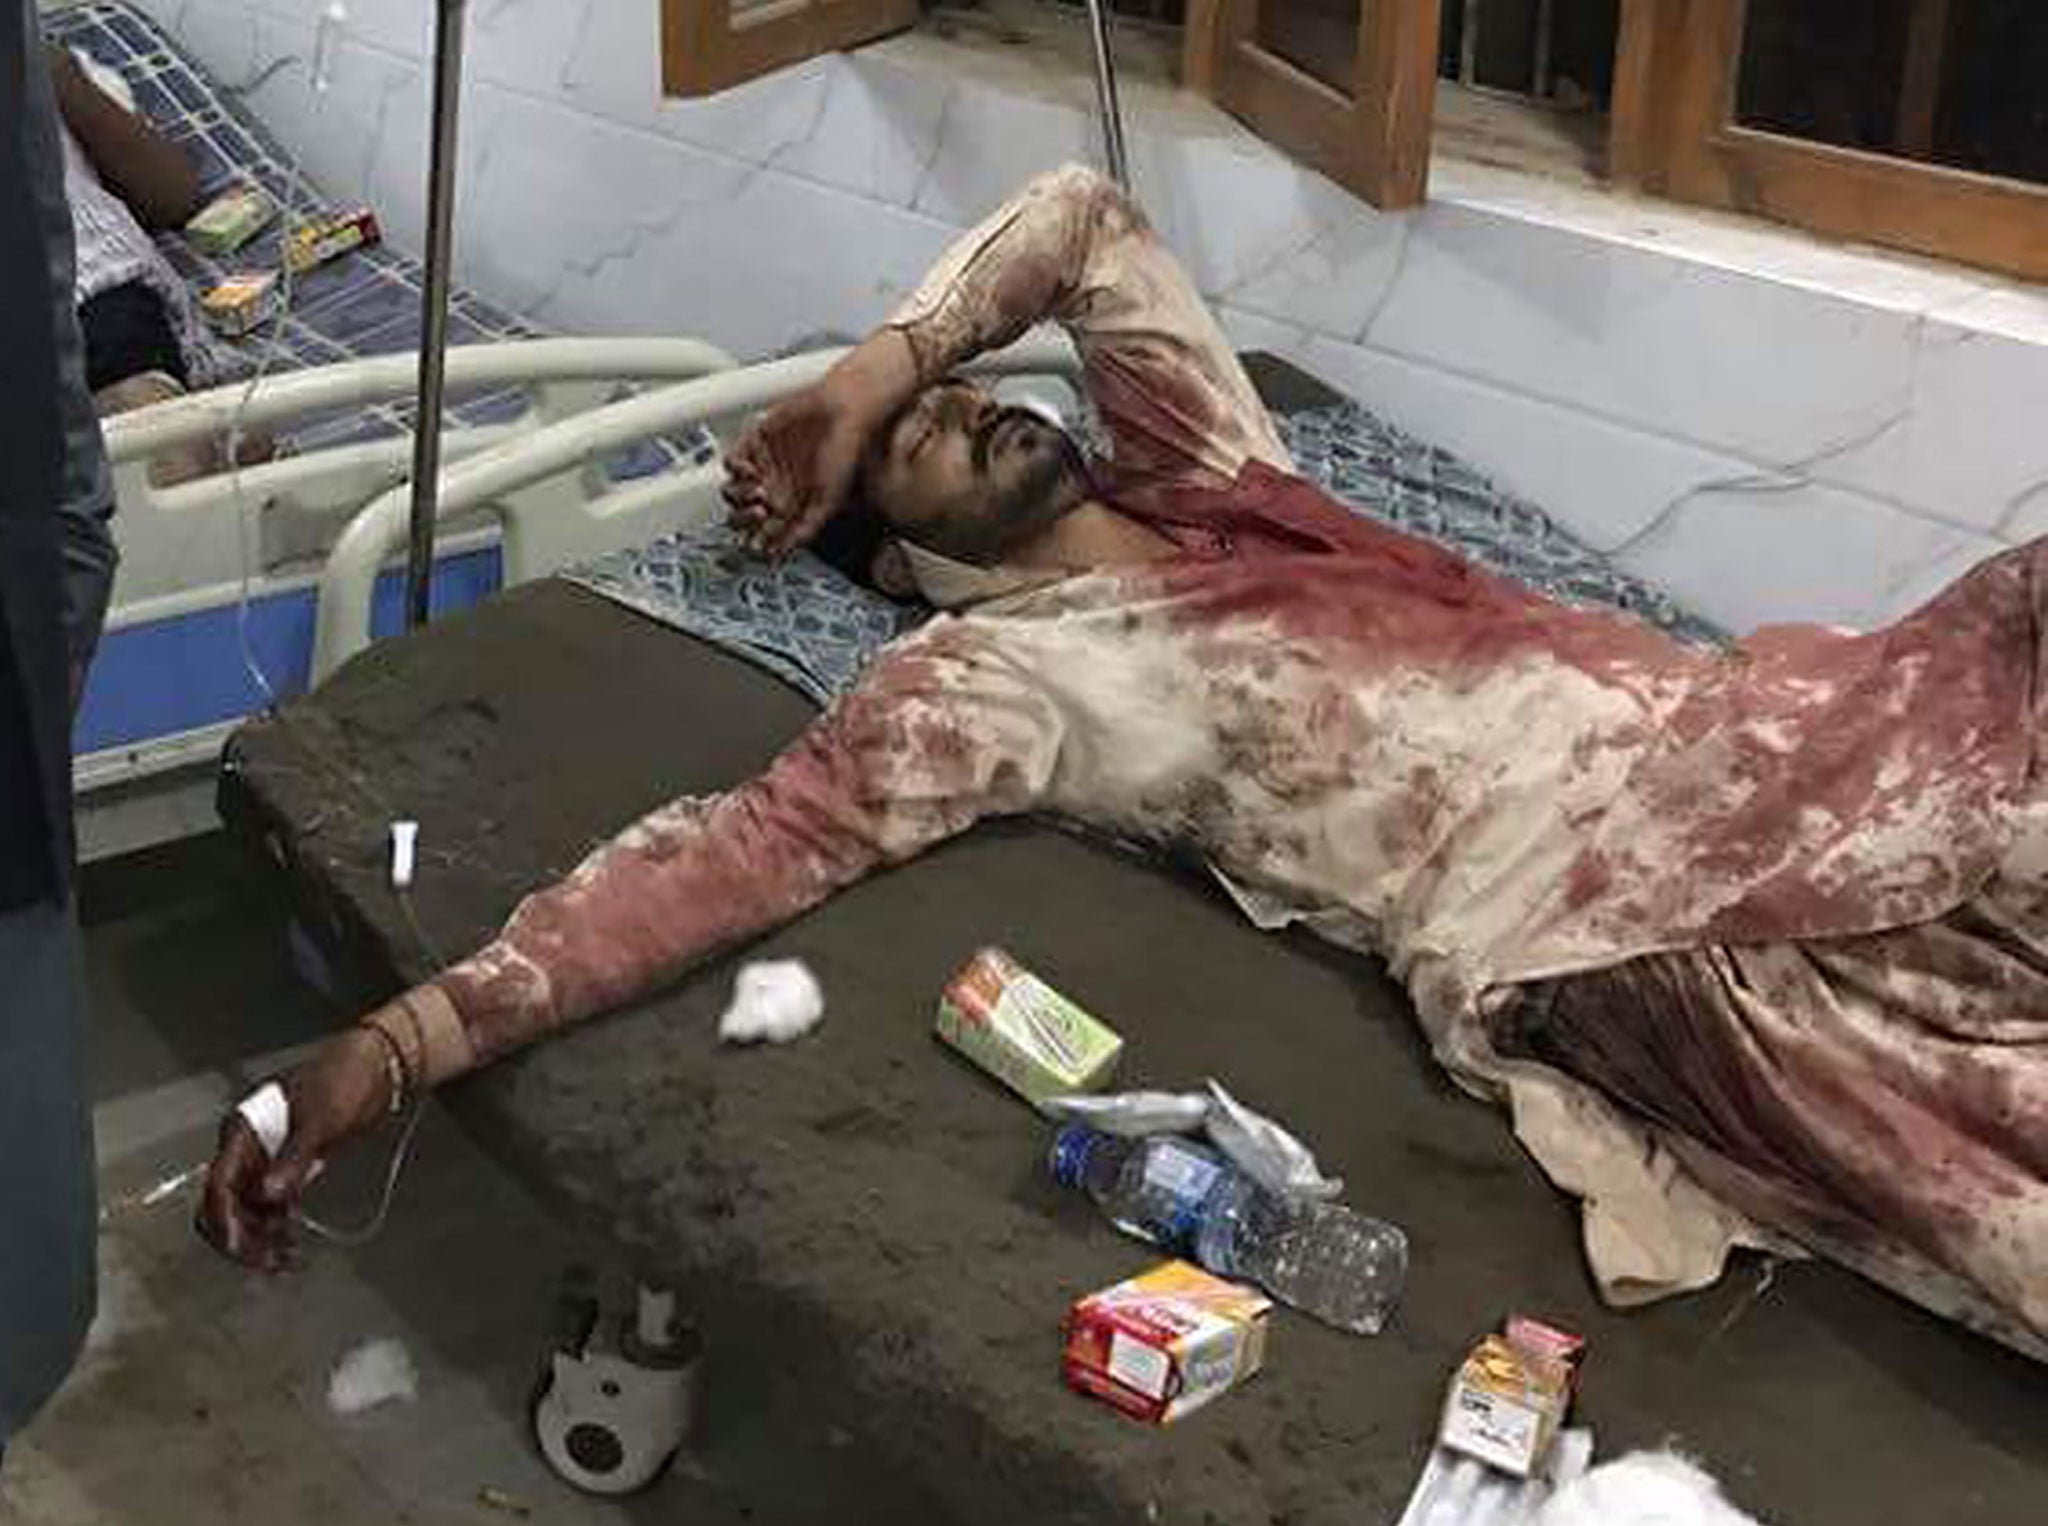 An injured man is treated at a local hospital after an explosion Lal Shahbaz Qalandar in Sehwan on 16 February